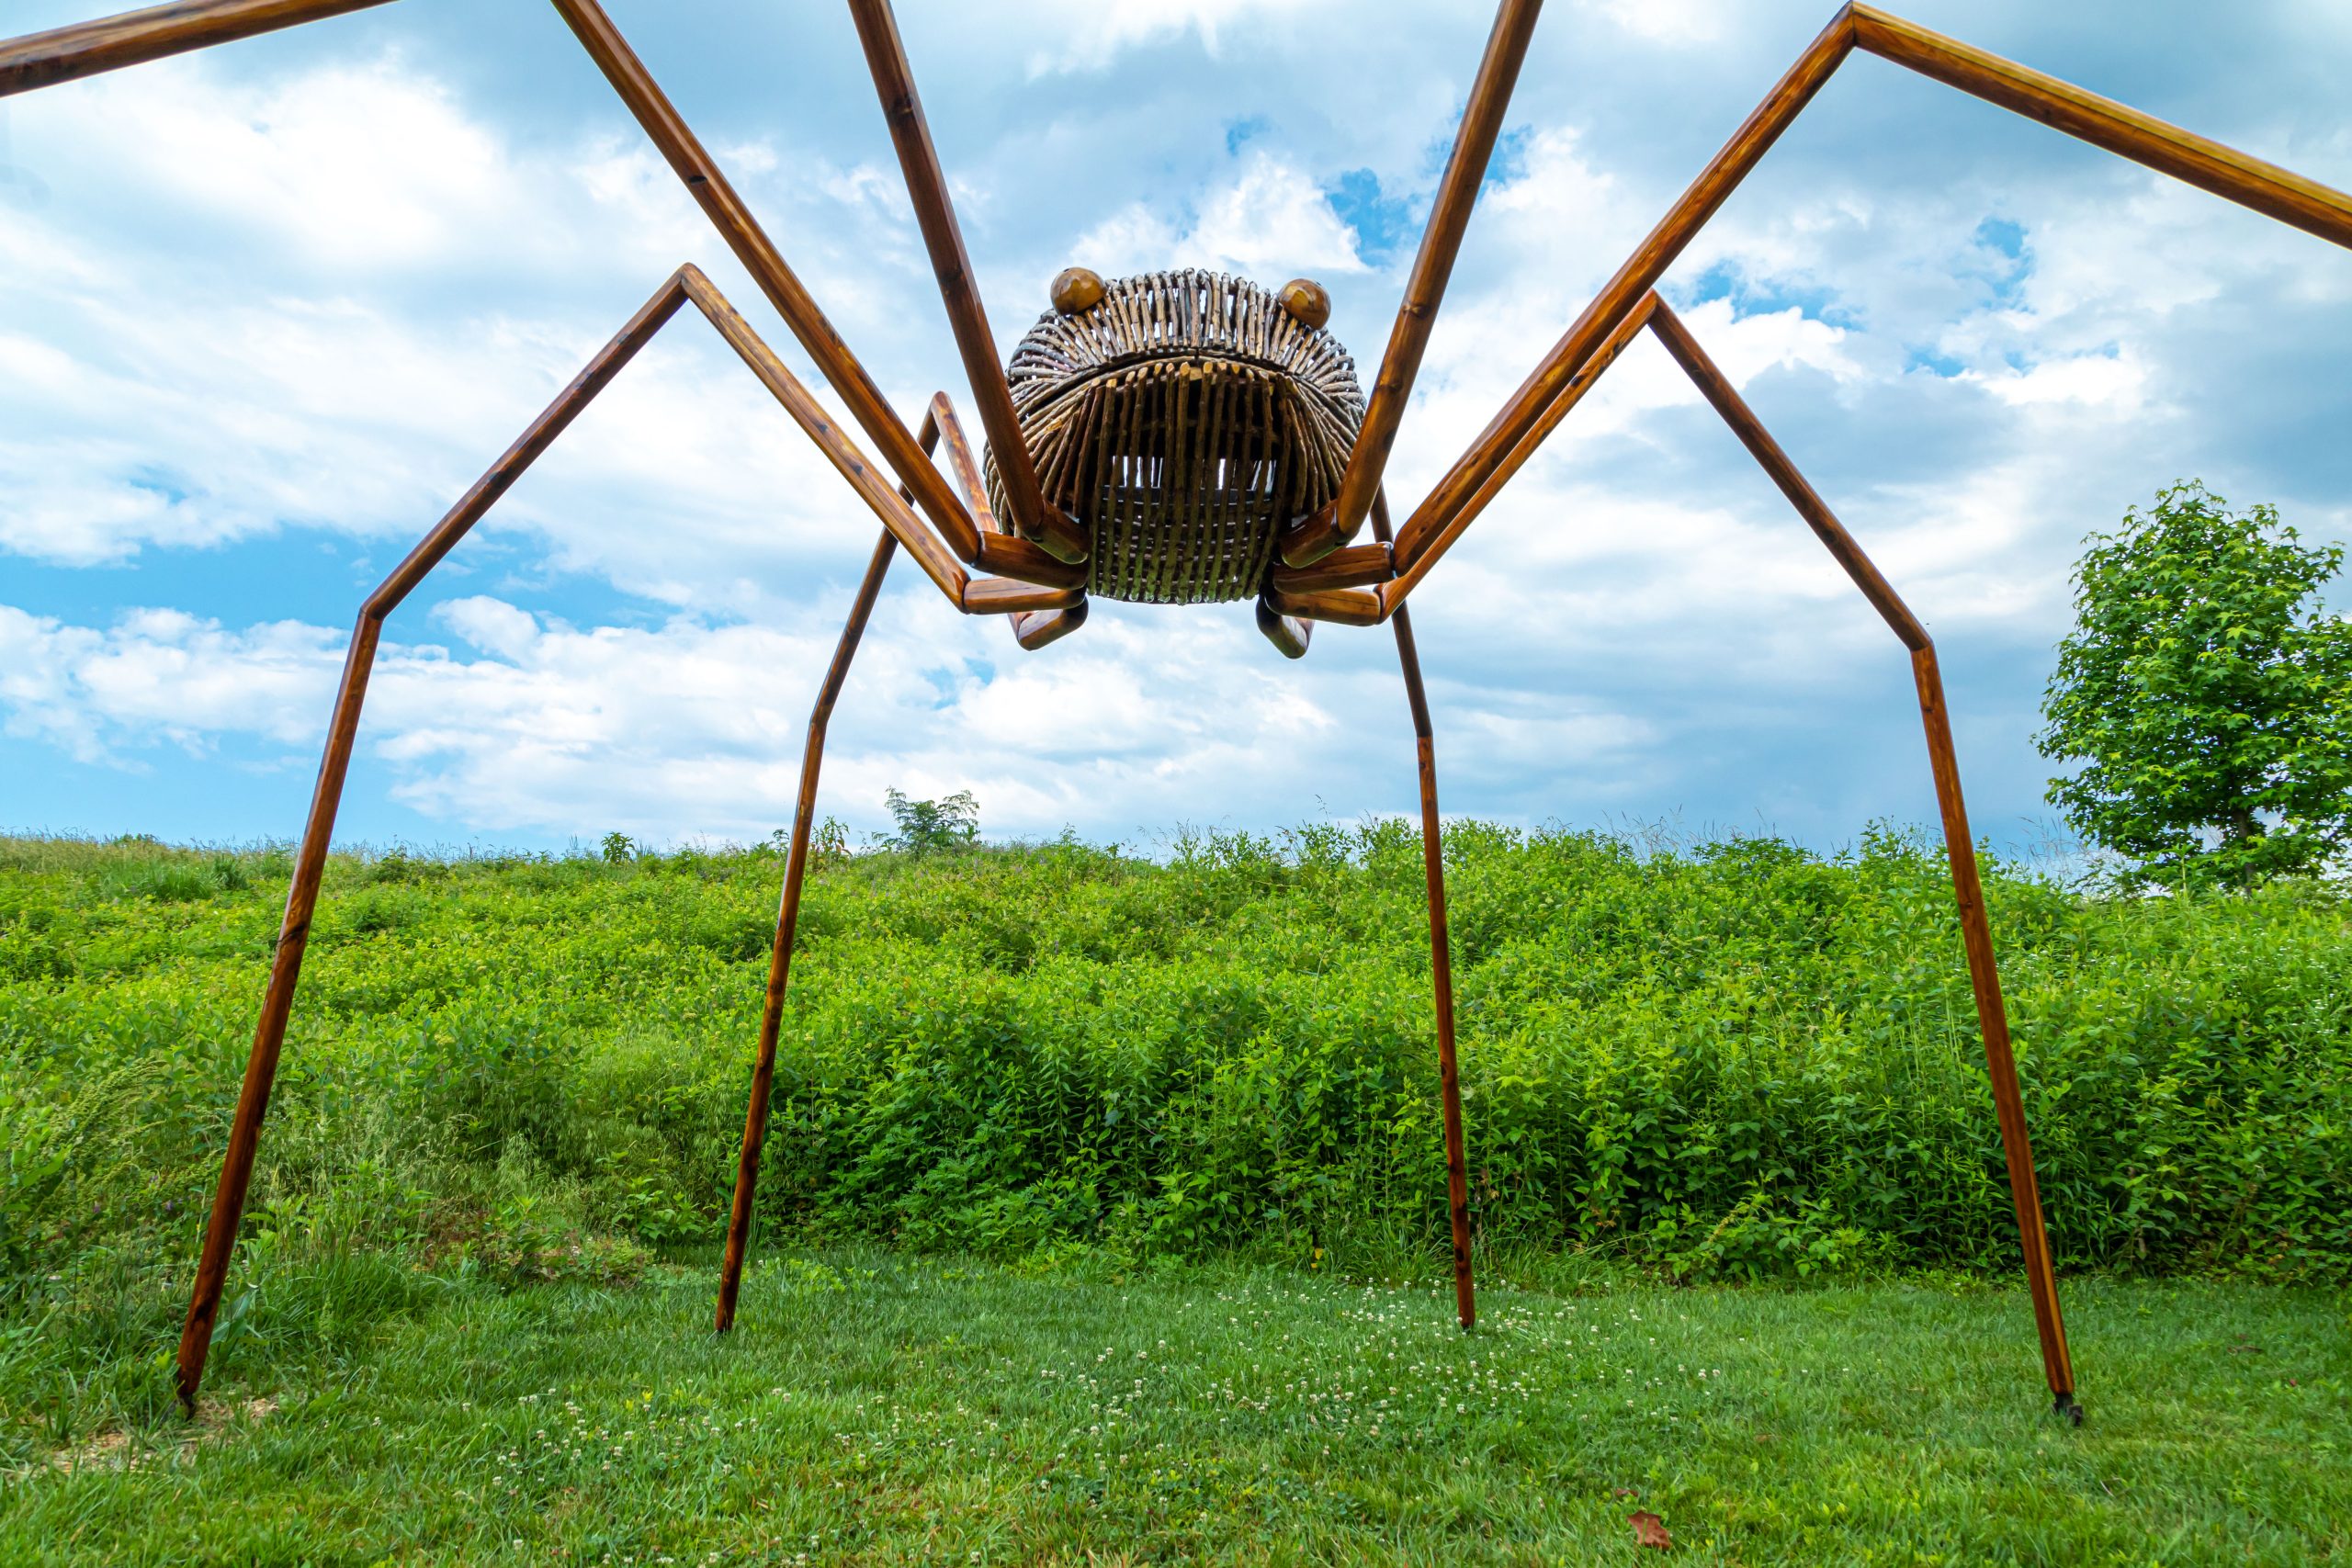 Daddy Long Legs Sculpture by David Rogers - Image by Tom Hennessy